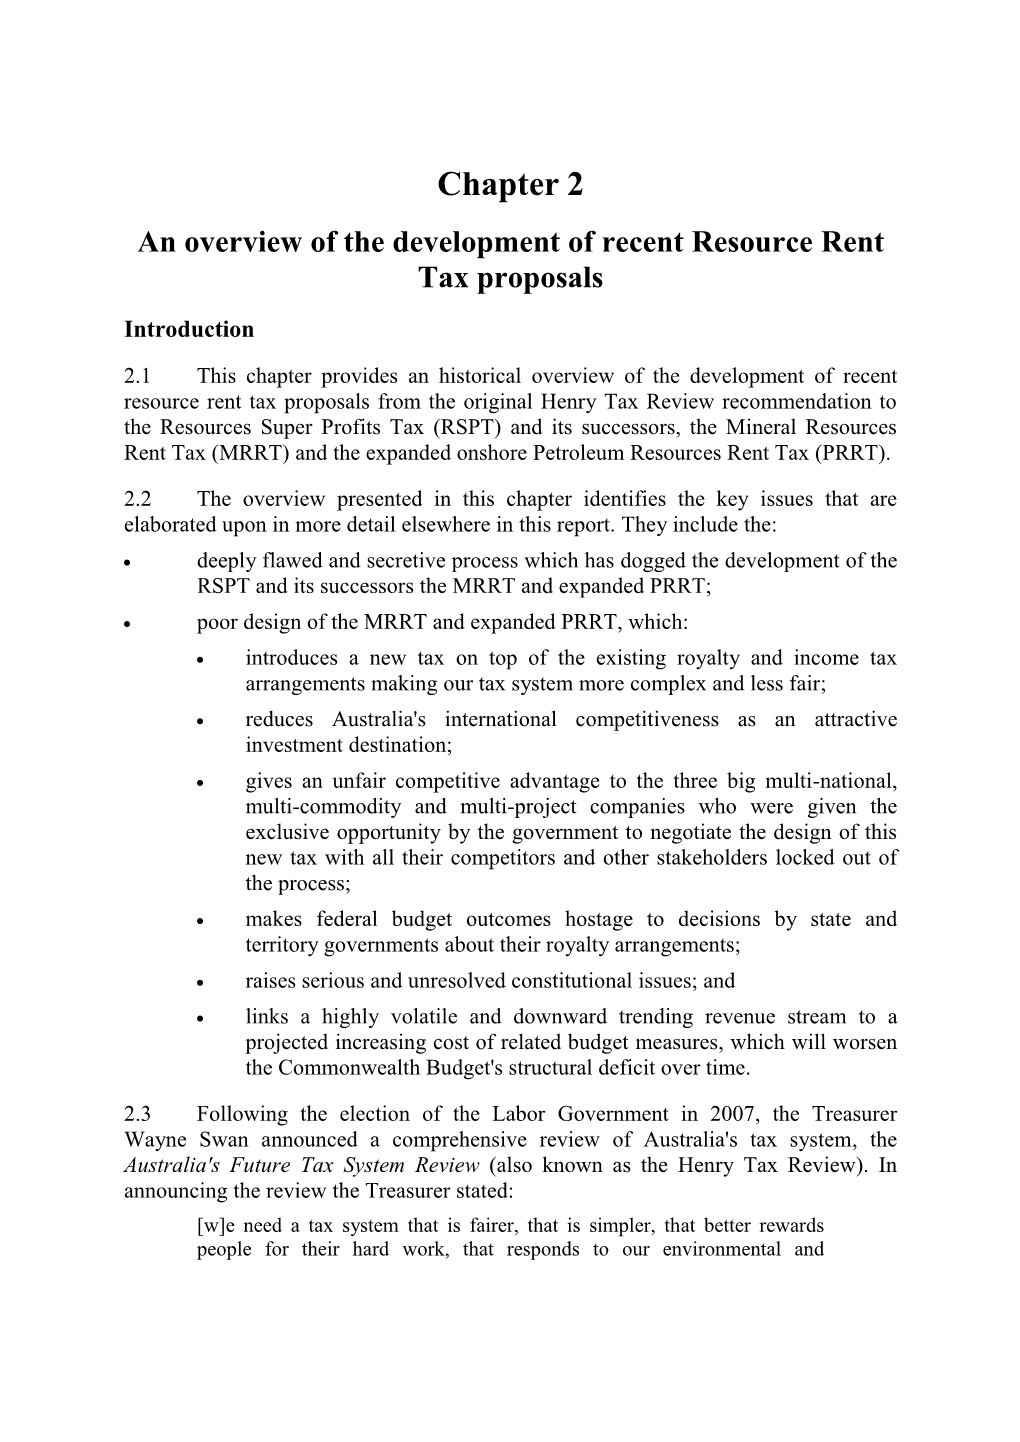 An Overview of the Development of Recent Resource Rent Tax Proposals Introduction